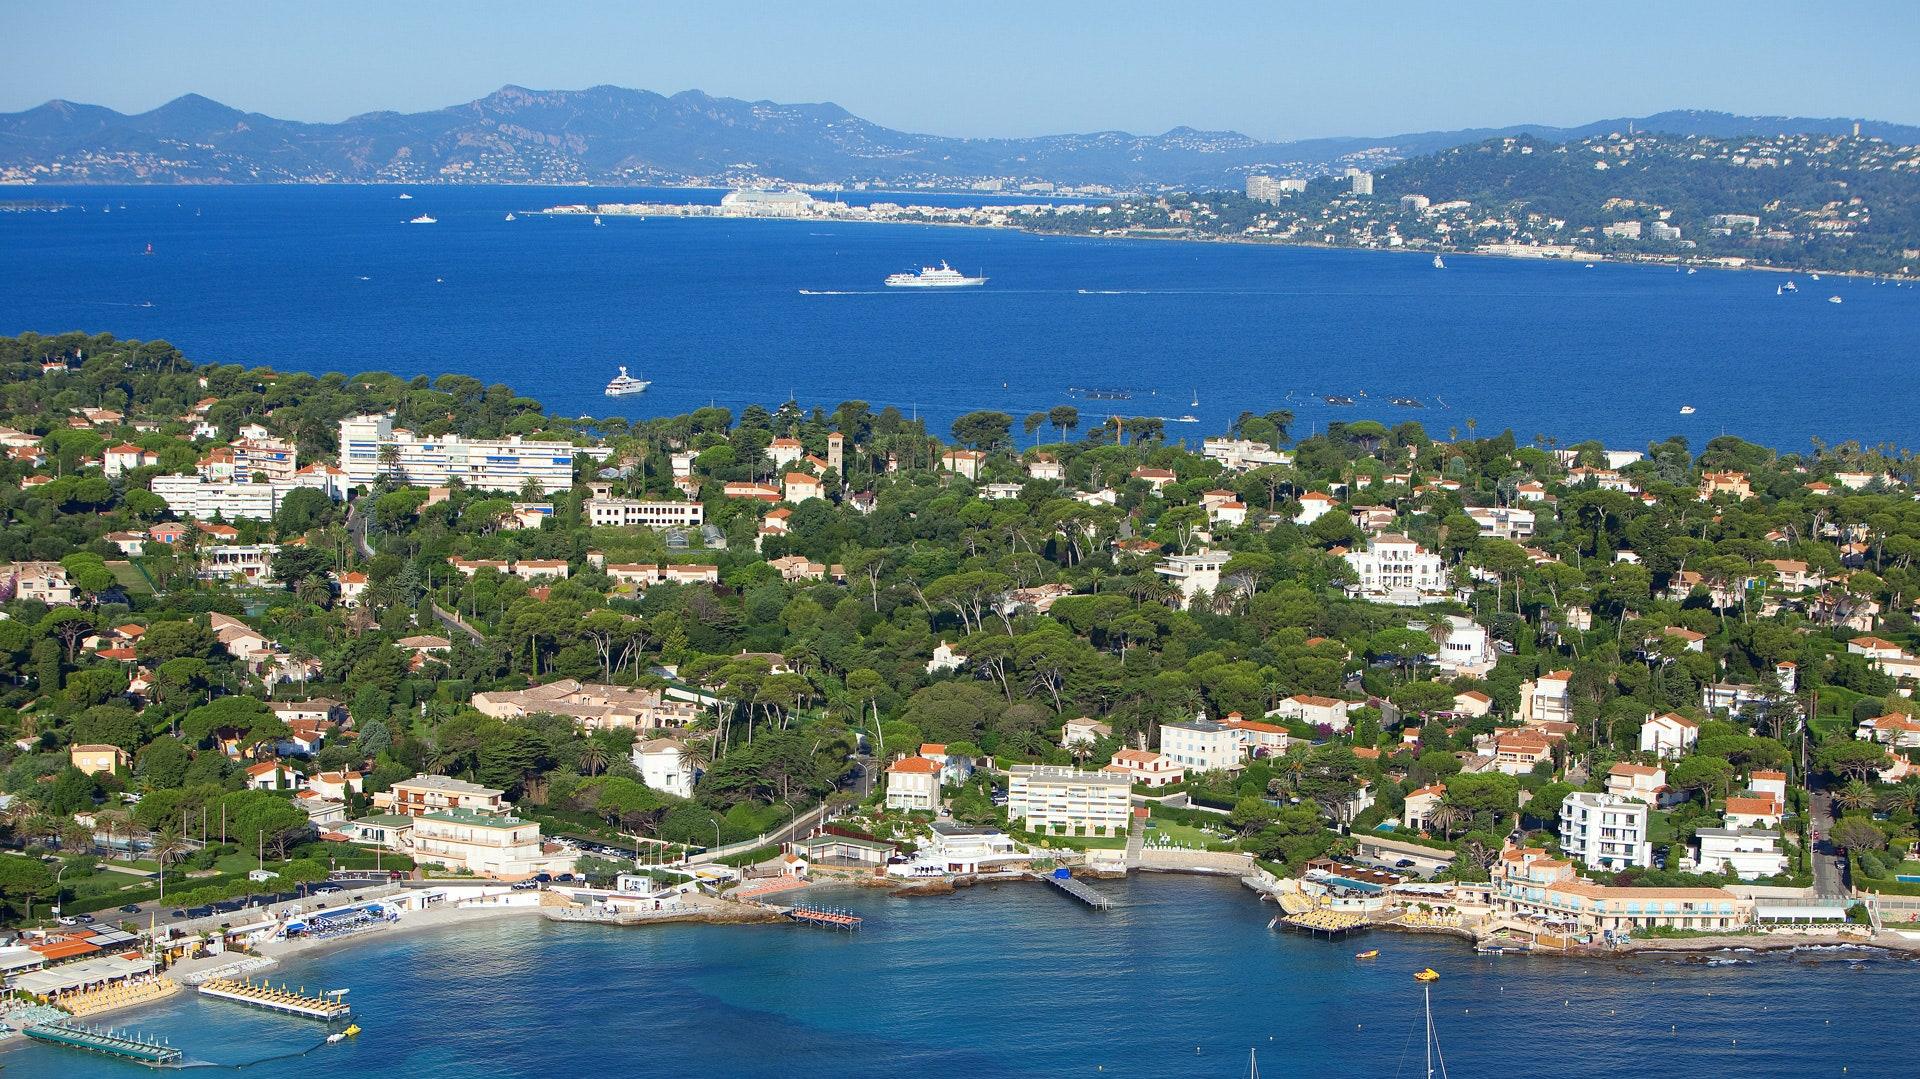 Beautiful Antibes background image featuring blue ocean with a large cruise ship sailing in the background surrounded by lush green trees and houses providing a stunning view of the coastal area